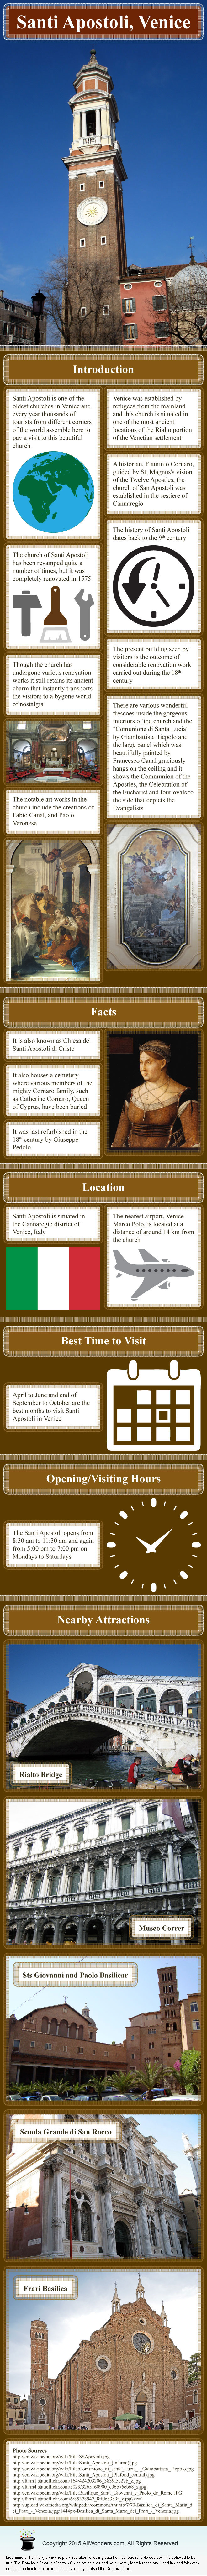 Infographic showing facts and information about Santi Apostoli in Venice